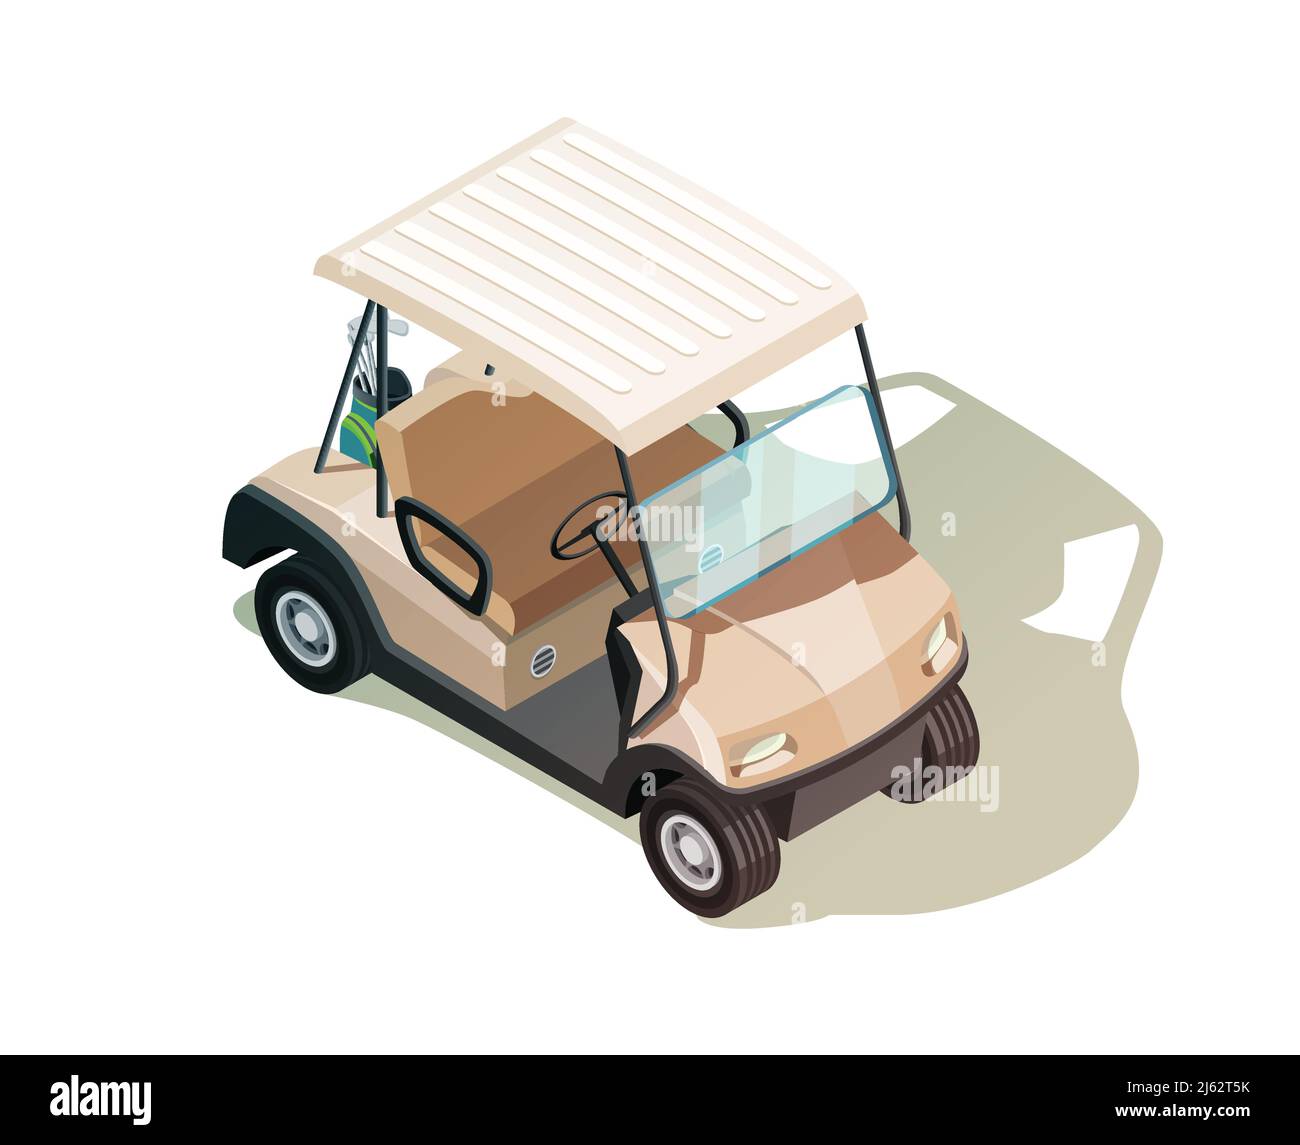 Golf isometric icon composition with realistic buggy vehicle with no passengers on blank background with shadow vector illustration Stock Vector